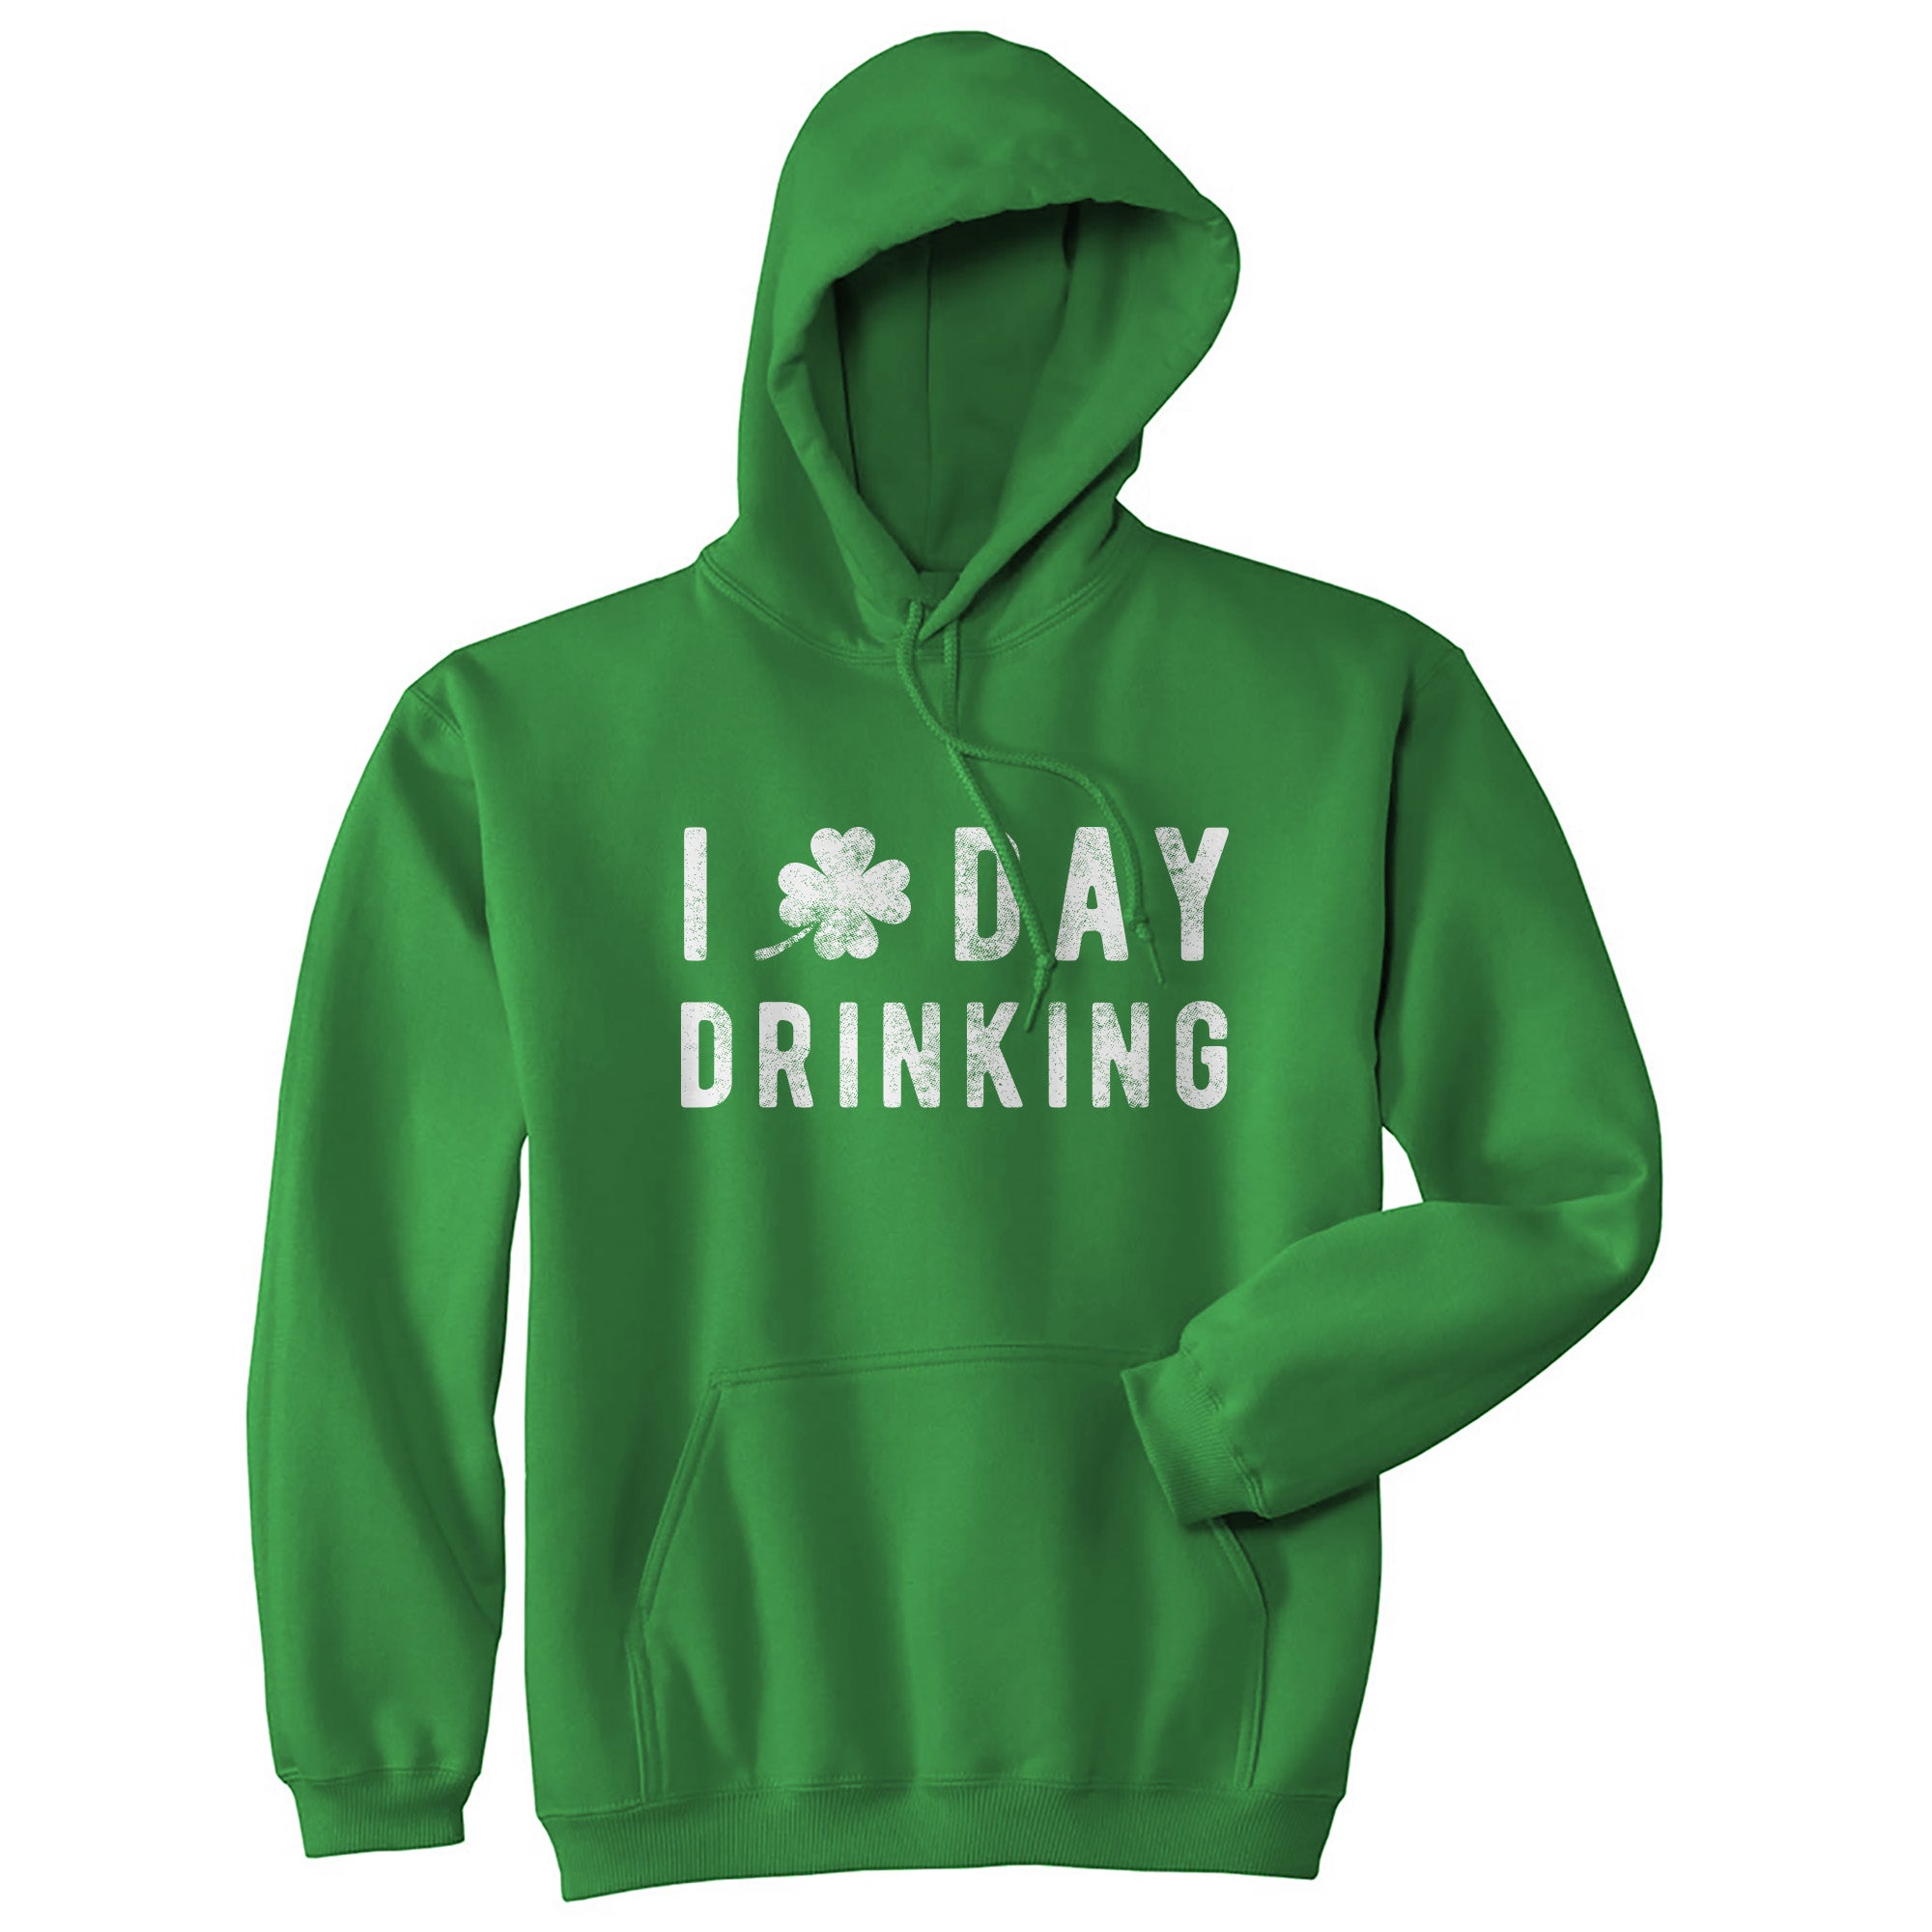 Funny Green - Clover Drinking I Clover Day Drinking Hoodie Nerdy Saint Patrick's Day Drinking Tee